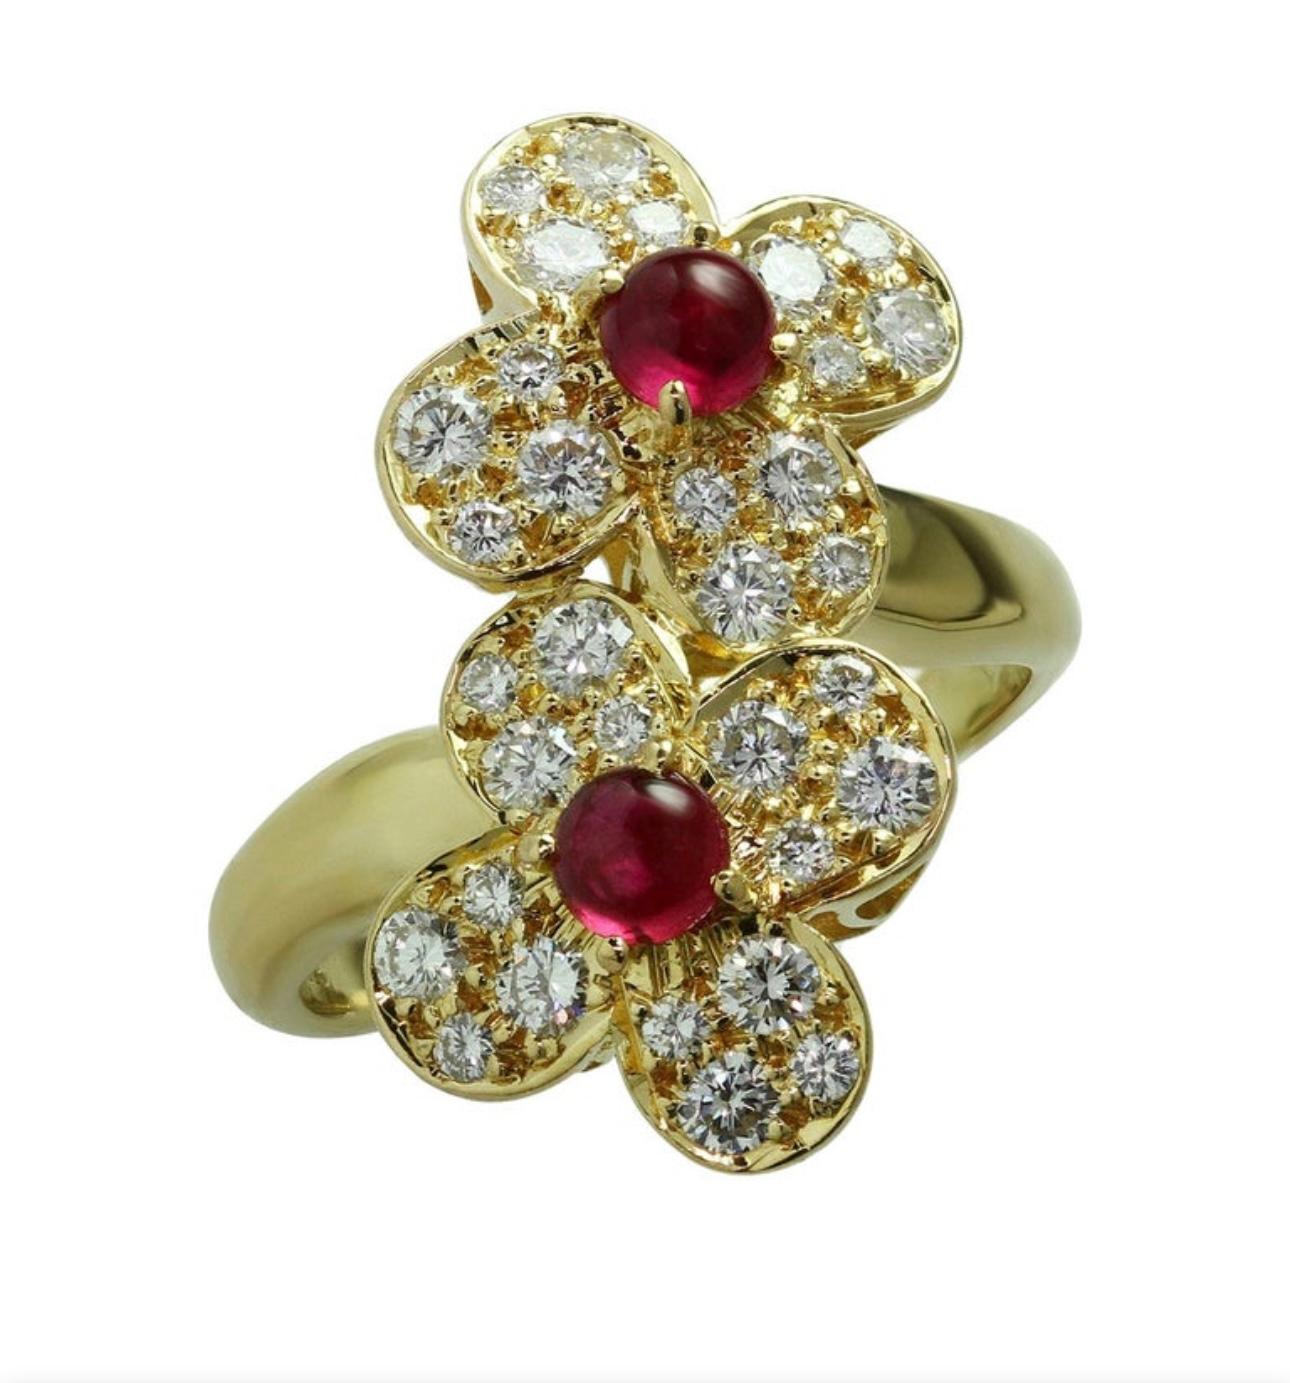 Van Cleef & Arpels Contemporary Ruby and Diamond “Trefle” Ring, 18KY Gold Size 6 For Sale 4